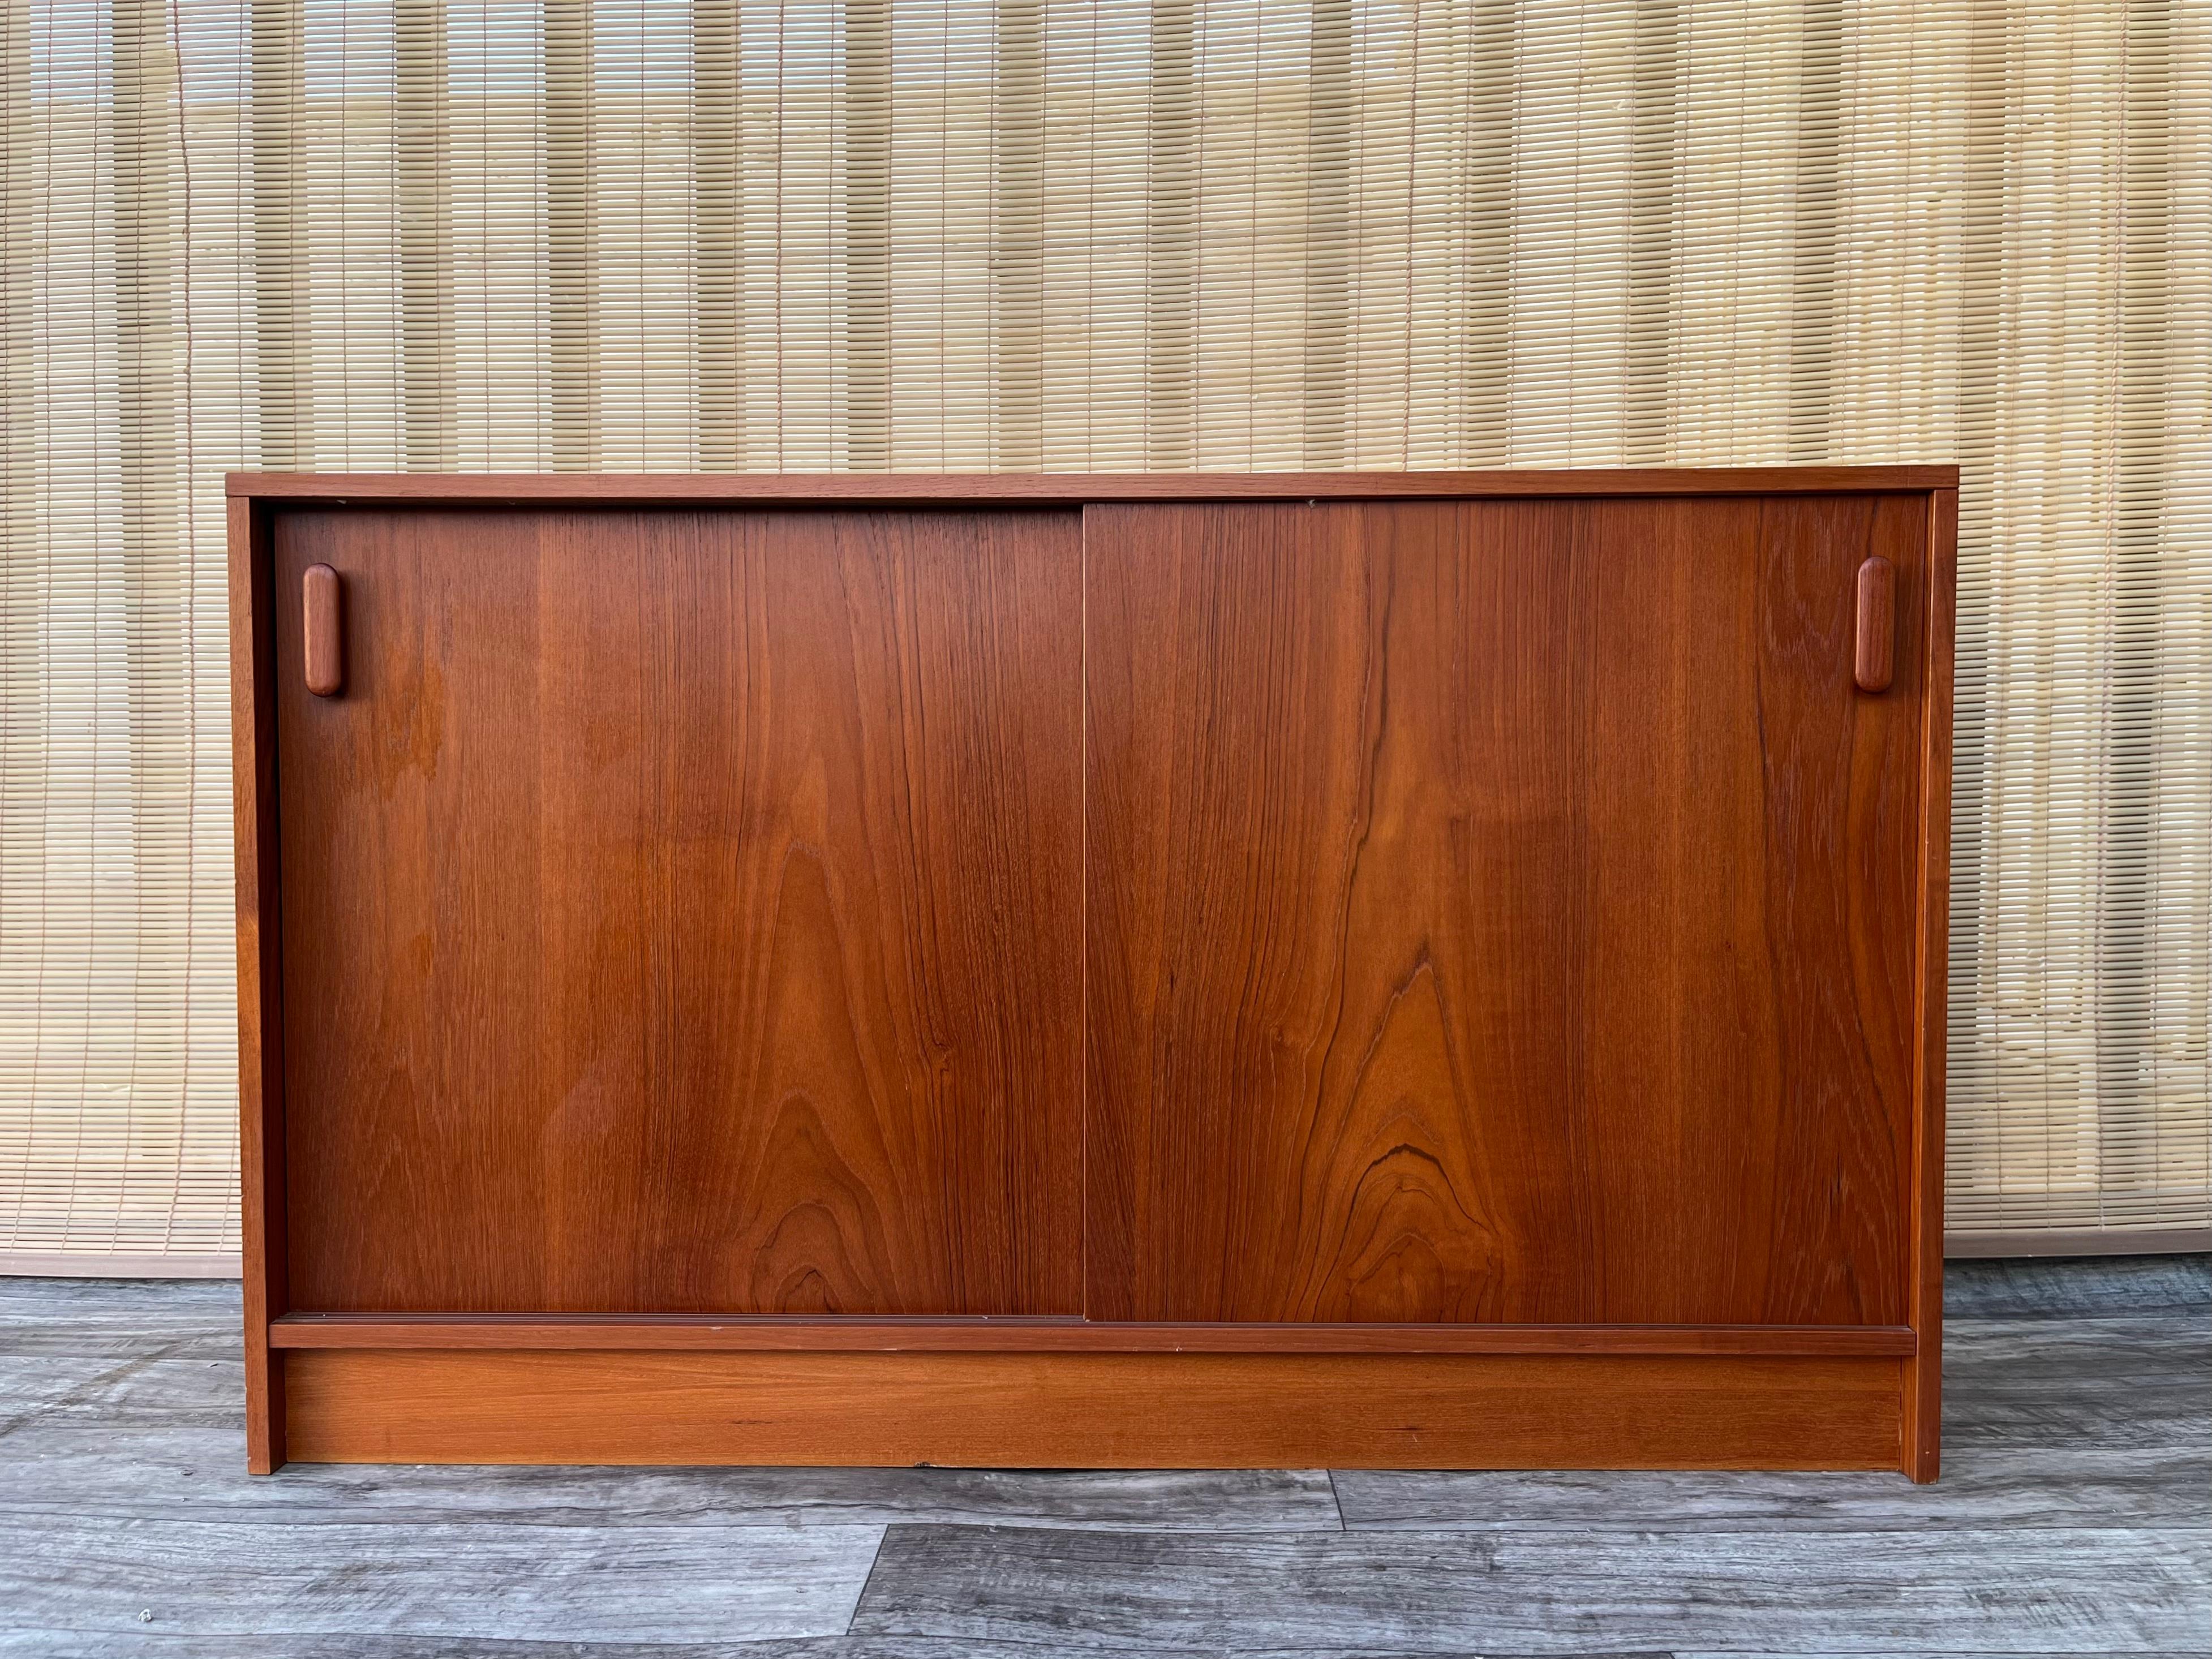 Vintage Mid Century Modern Danish Teak Sideboard/ Credenza. Circa 1970s
Features a sleek minimalist Mid Century Modern Scandinavian Design, a wonderful teak wood grain, two sliding doors, adjustable shelves, and a compact size to fit in any small